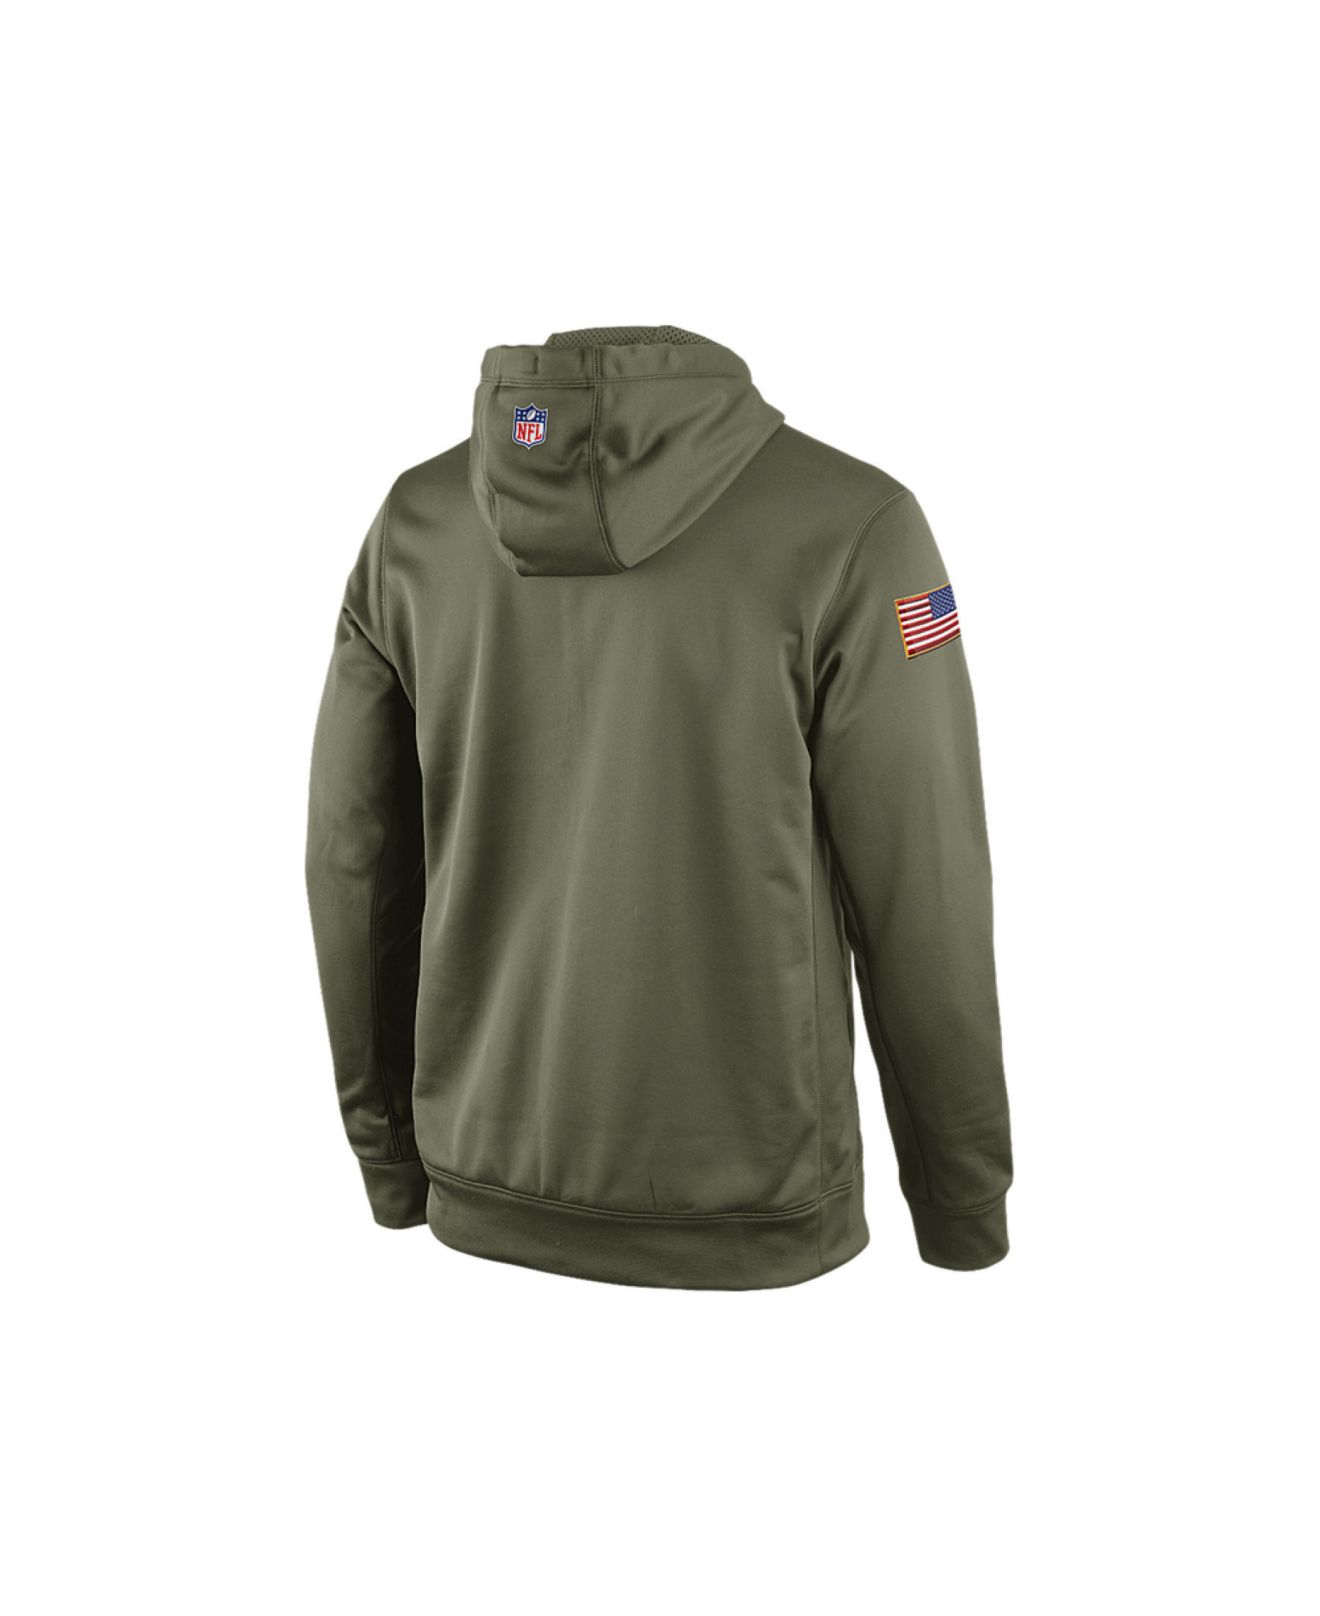 salute to service falcons hoodie